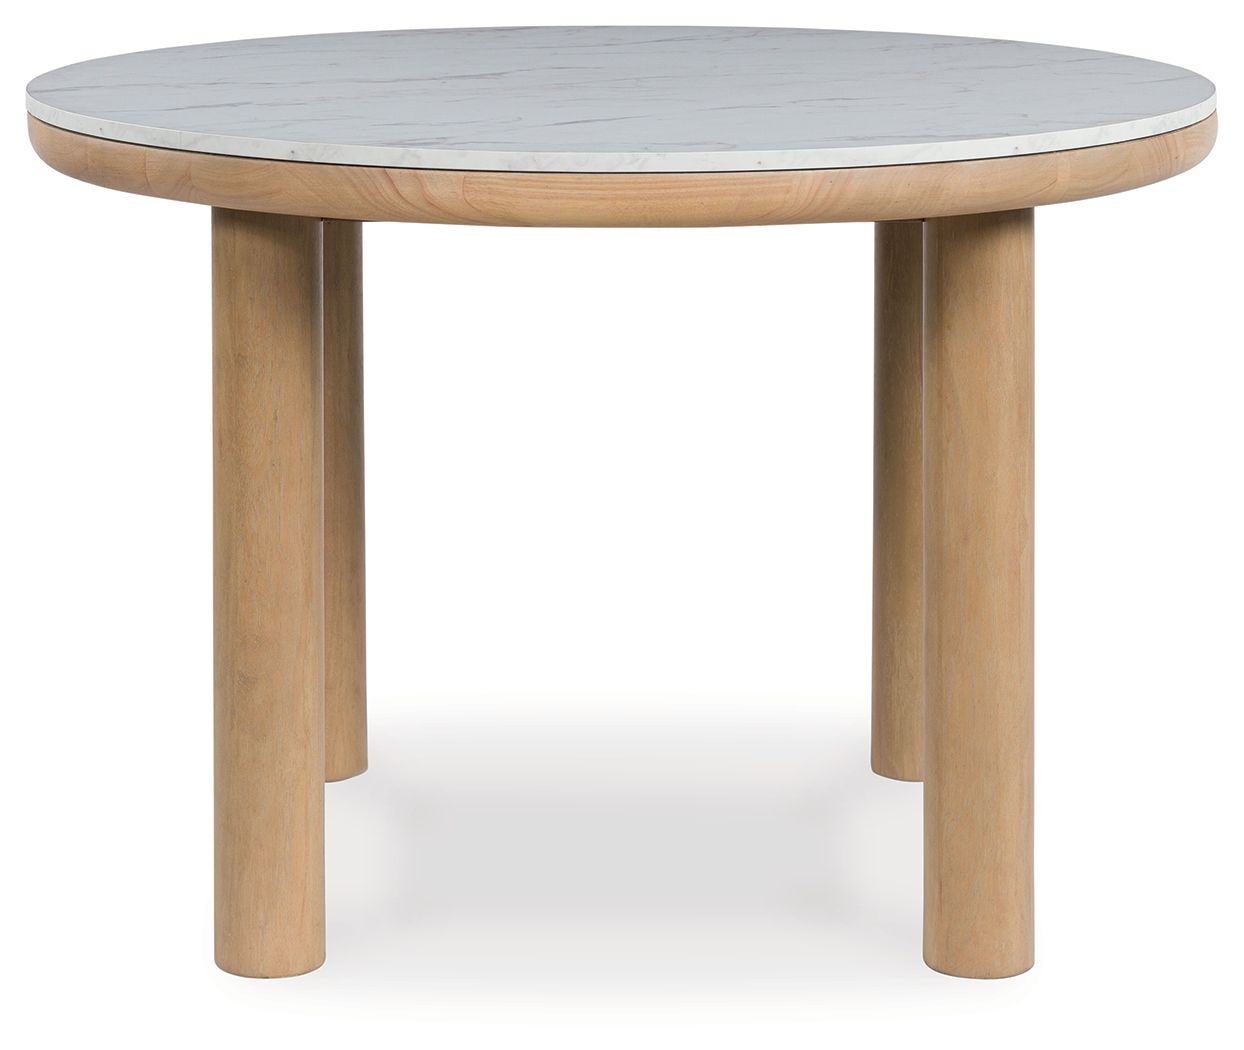 Sawdyn - Light Brown - Round Dining Room Table